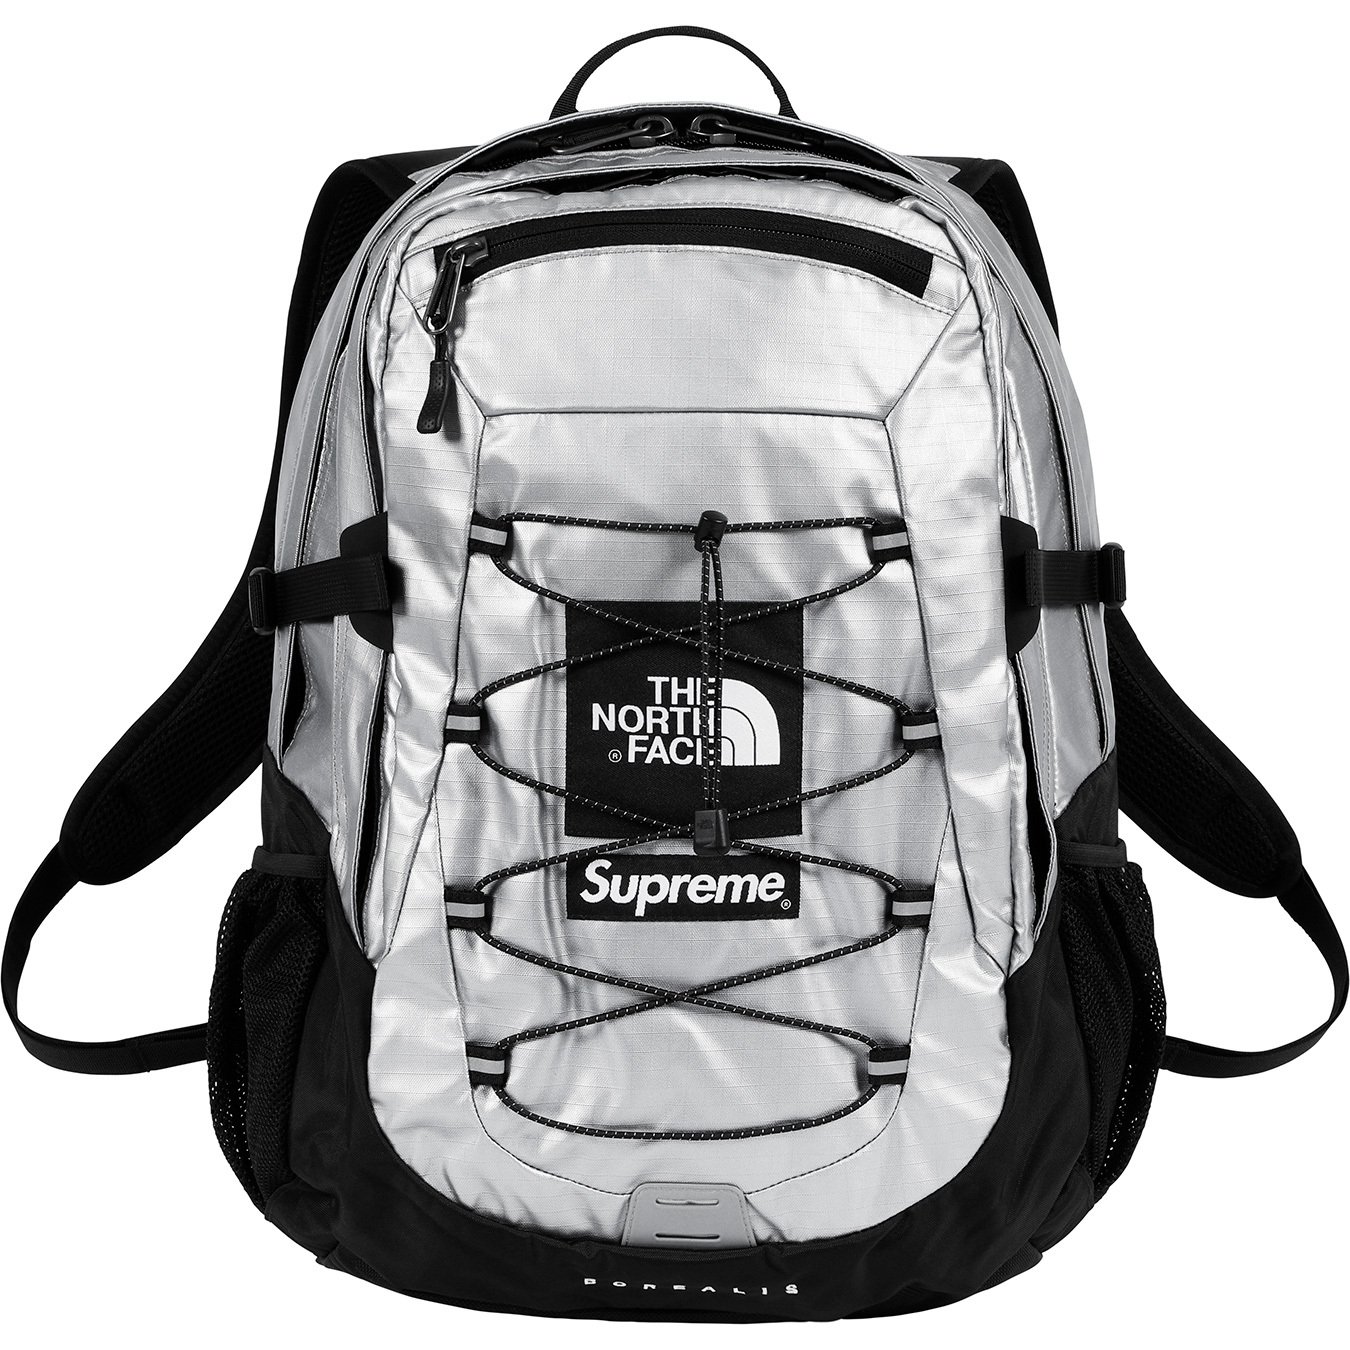 northface and supreme backpack